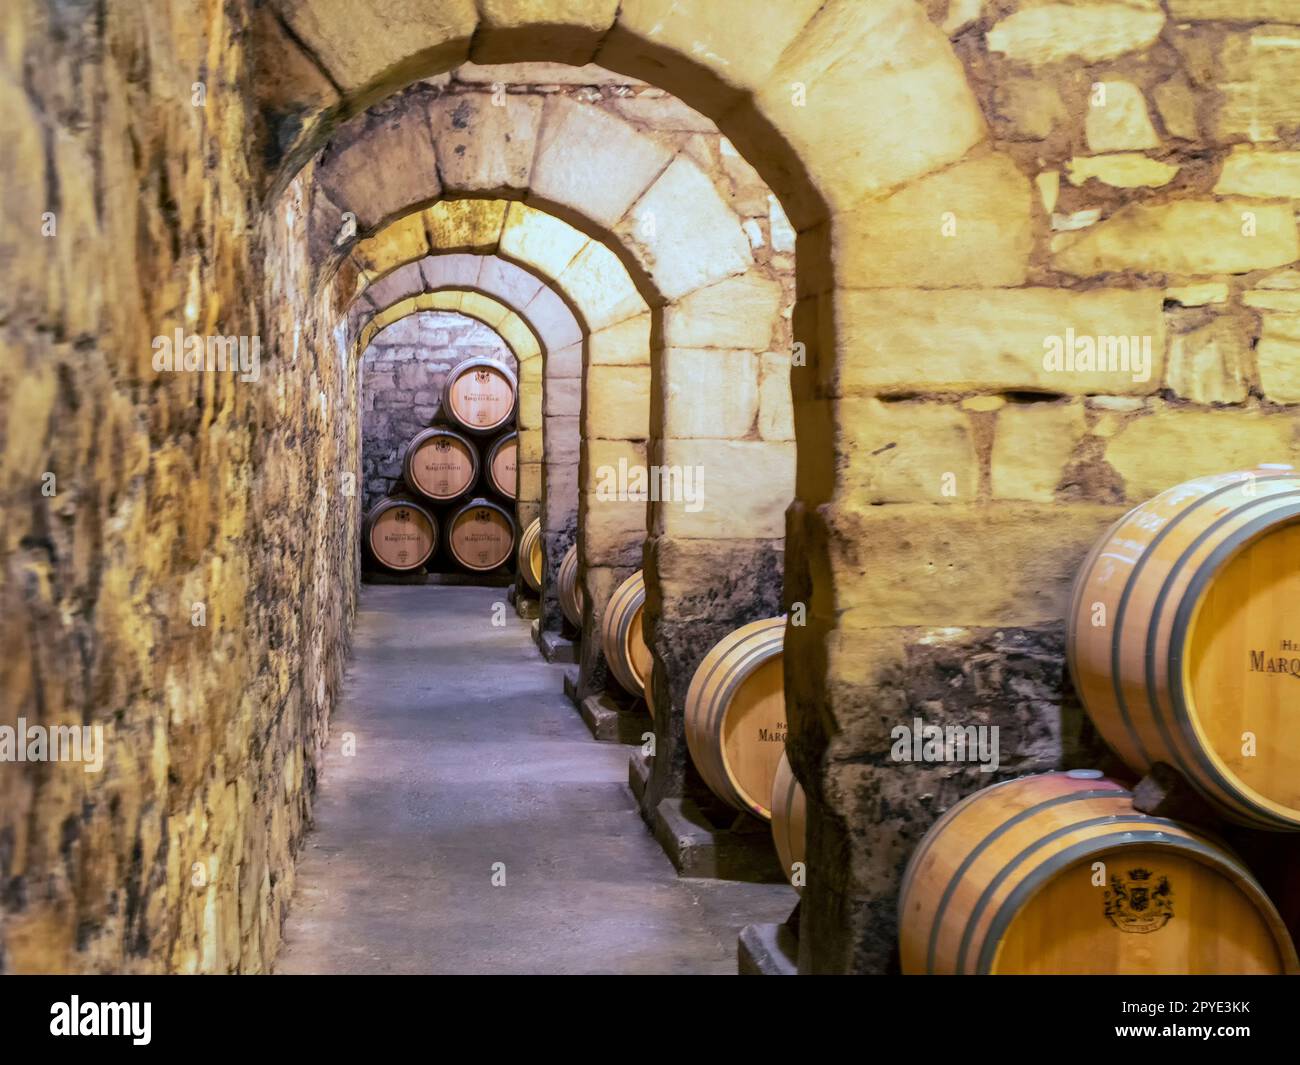 Old wooden barrels for preserving wine, inside the Marques de Riscal winery in the Rioja Alavesa. Stock Photo